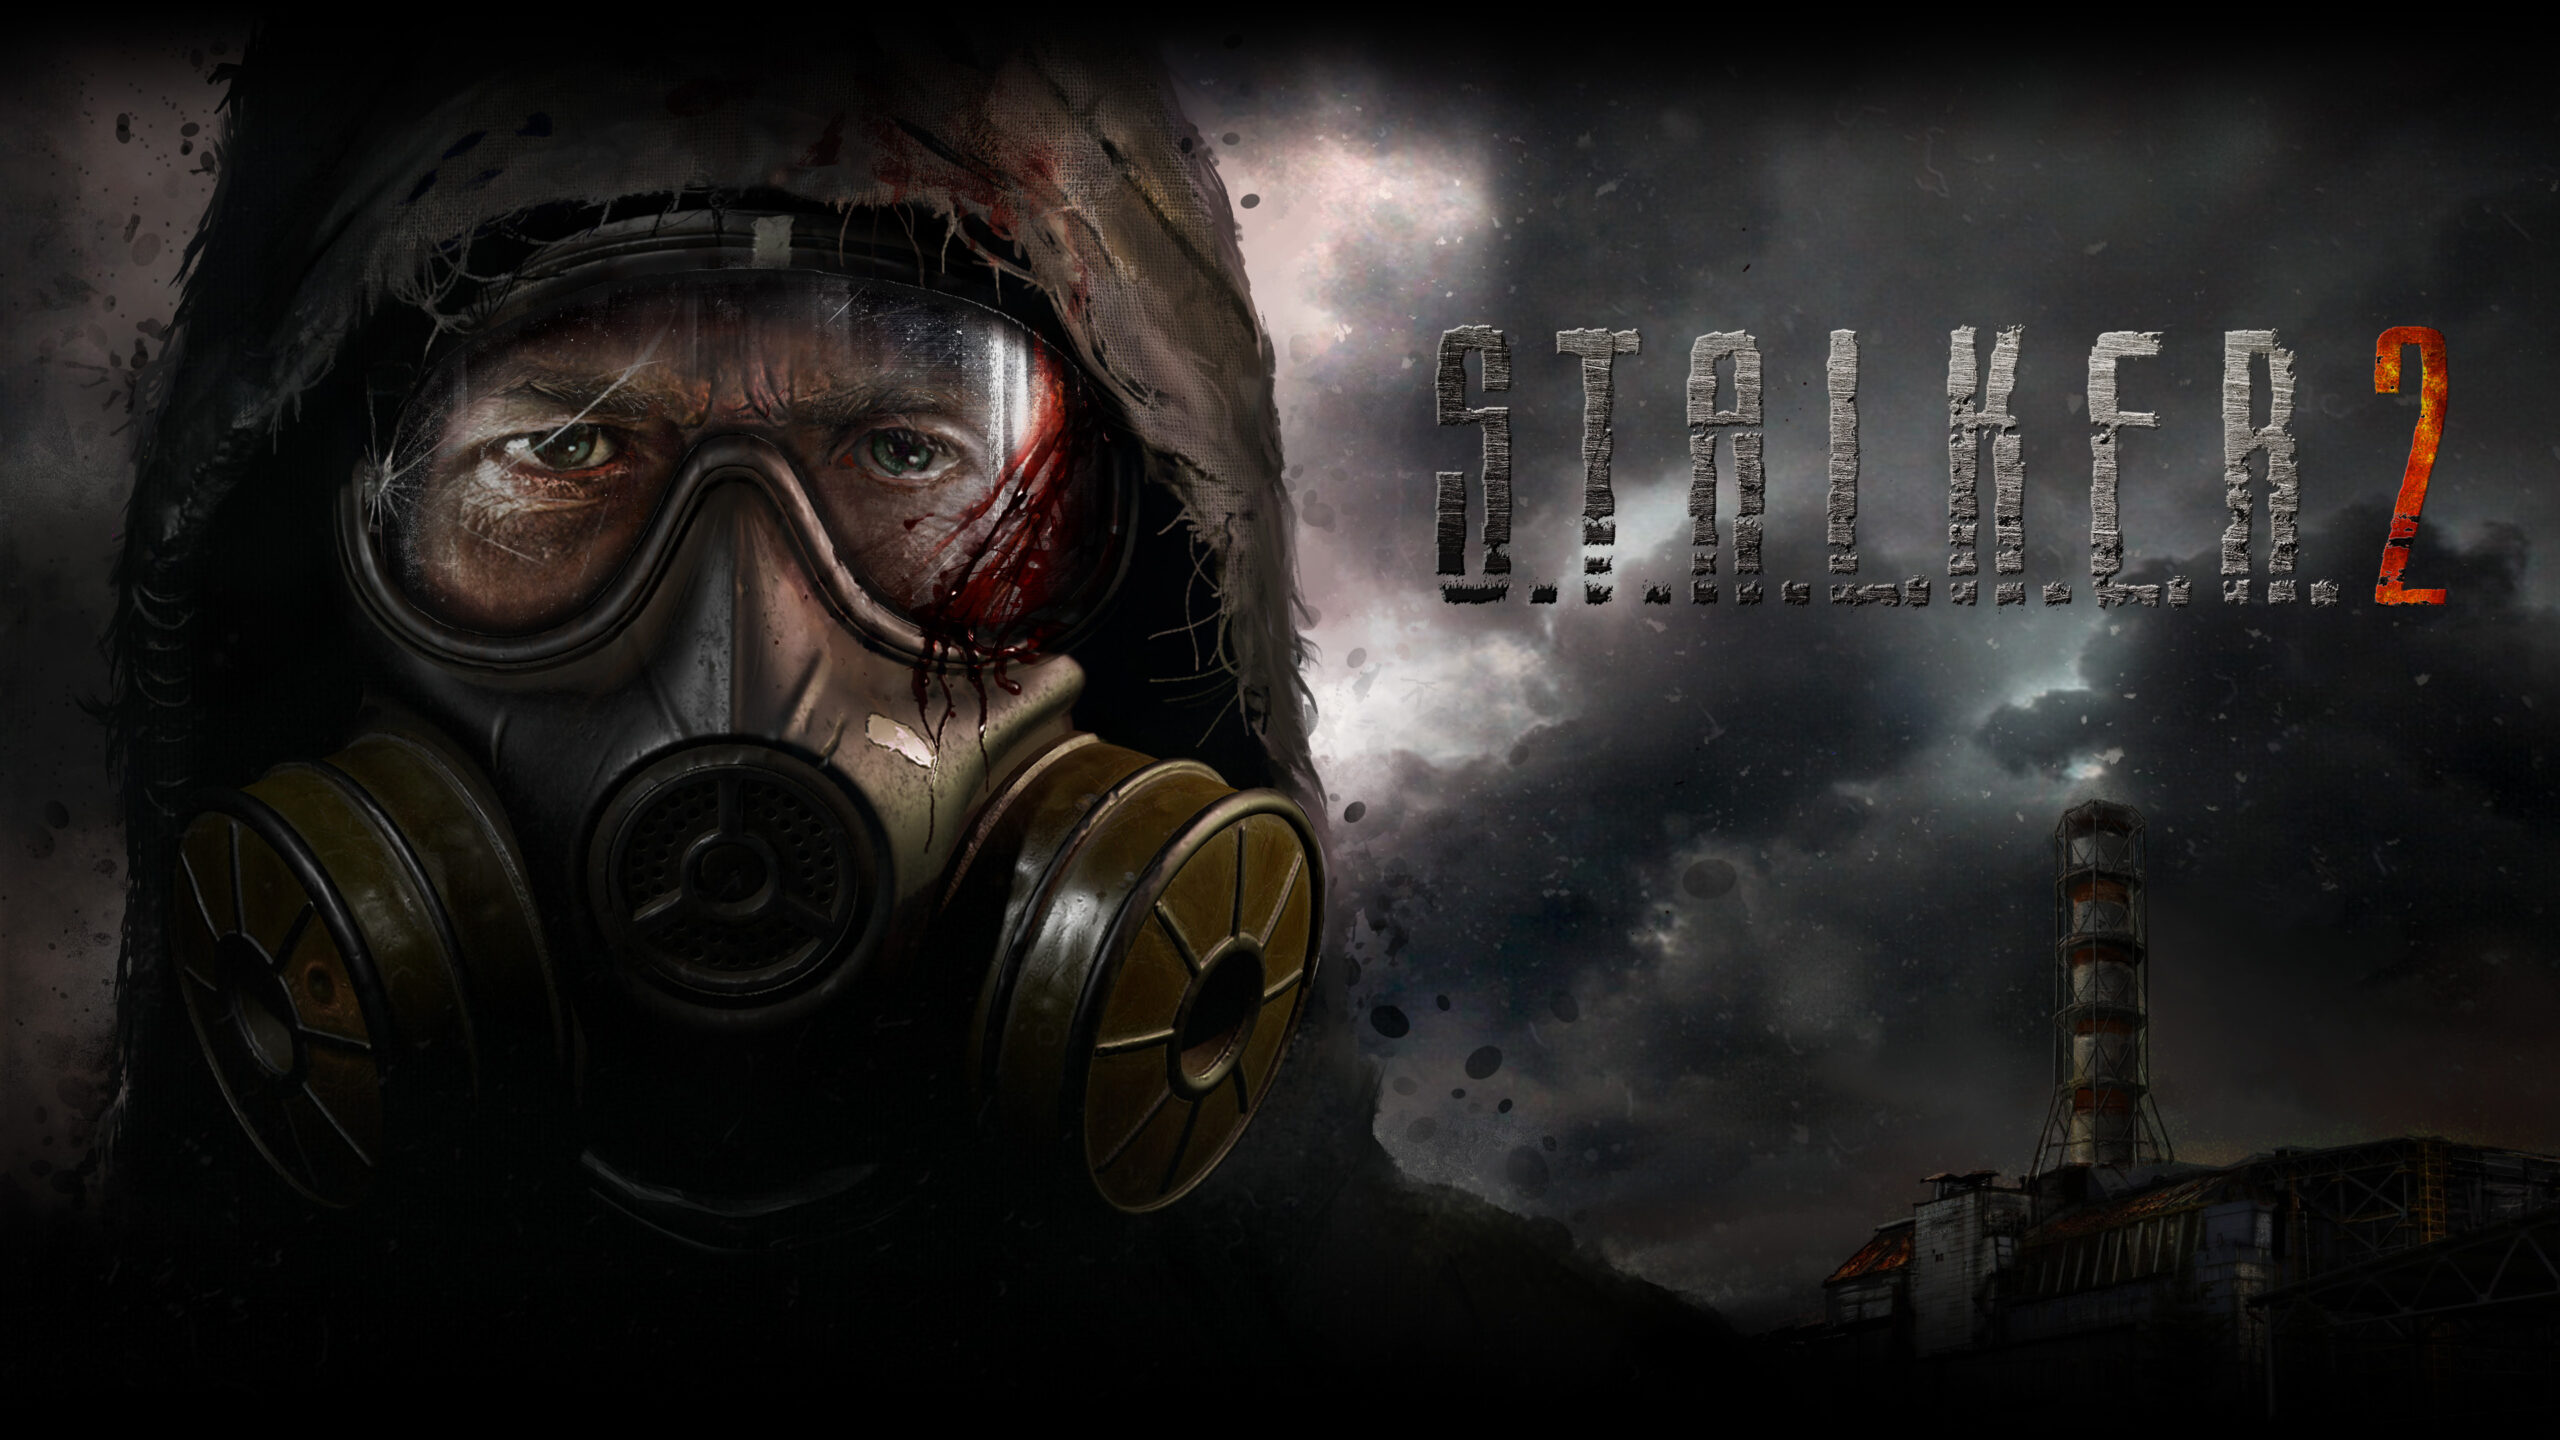 S.T.A.L.K.E.R. 2 PC Full Game Complete Free Download